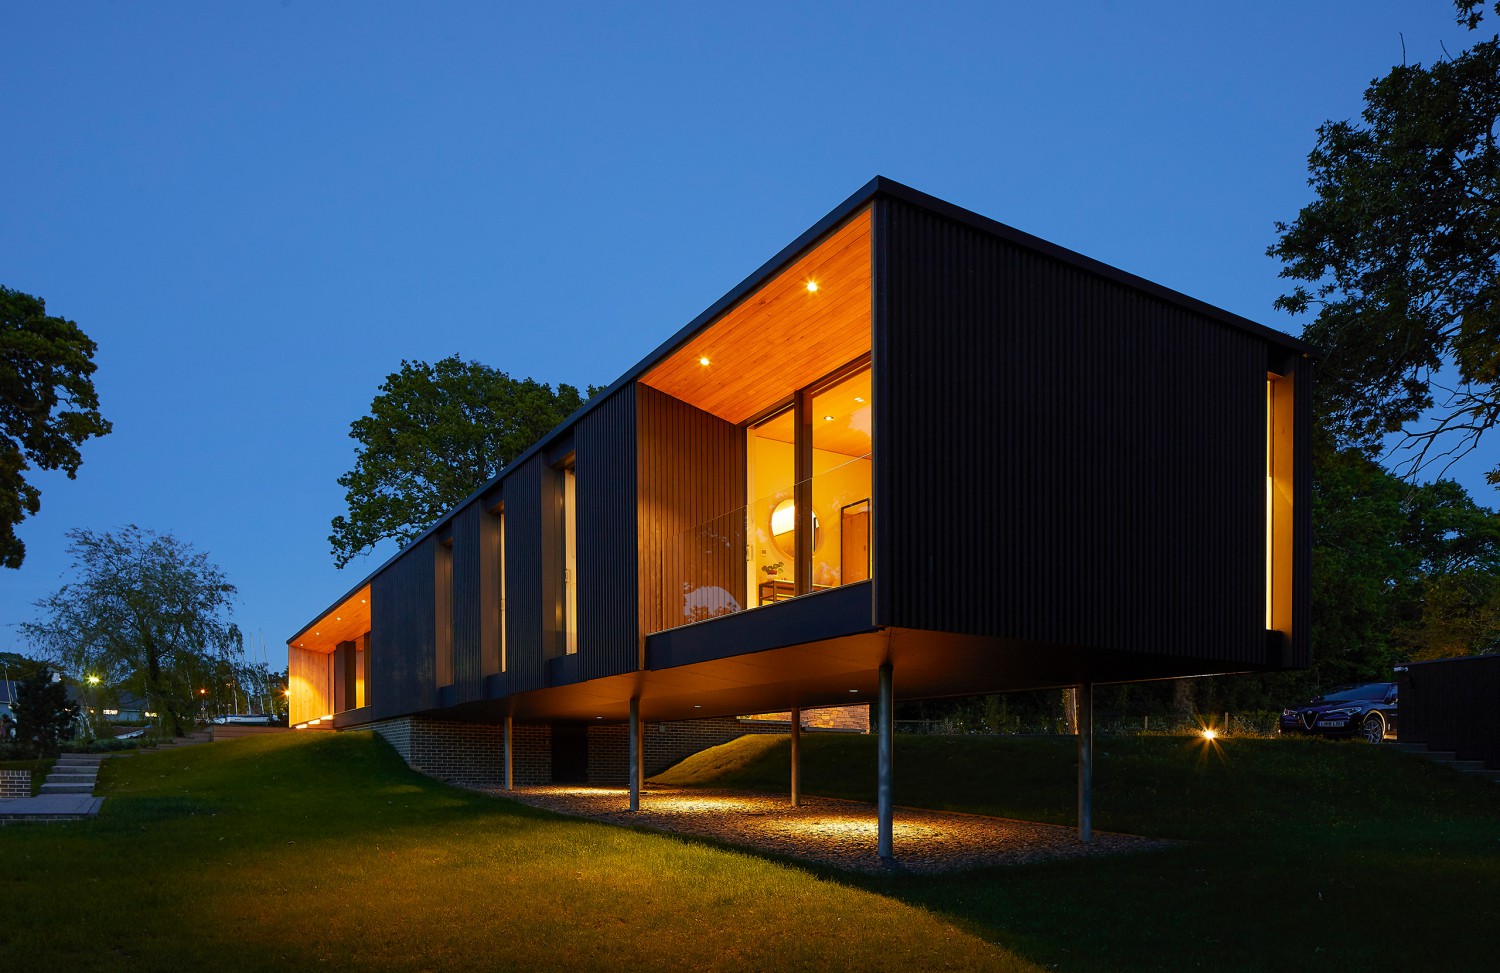 Strom Architects Private House Isle of Wight Hufton+Crow 031 v2